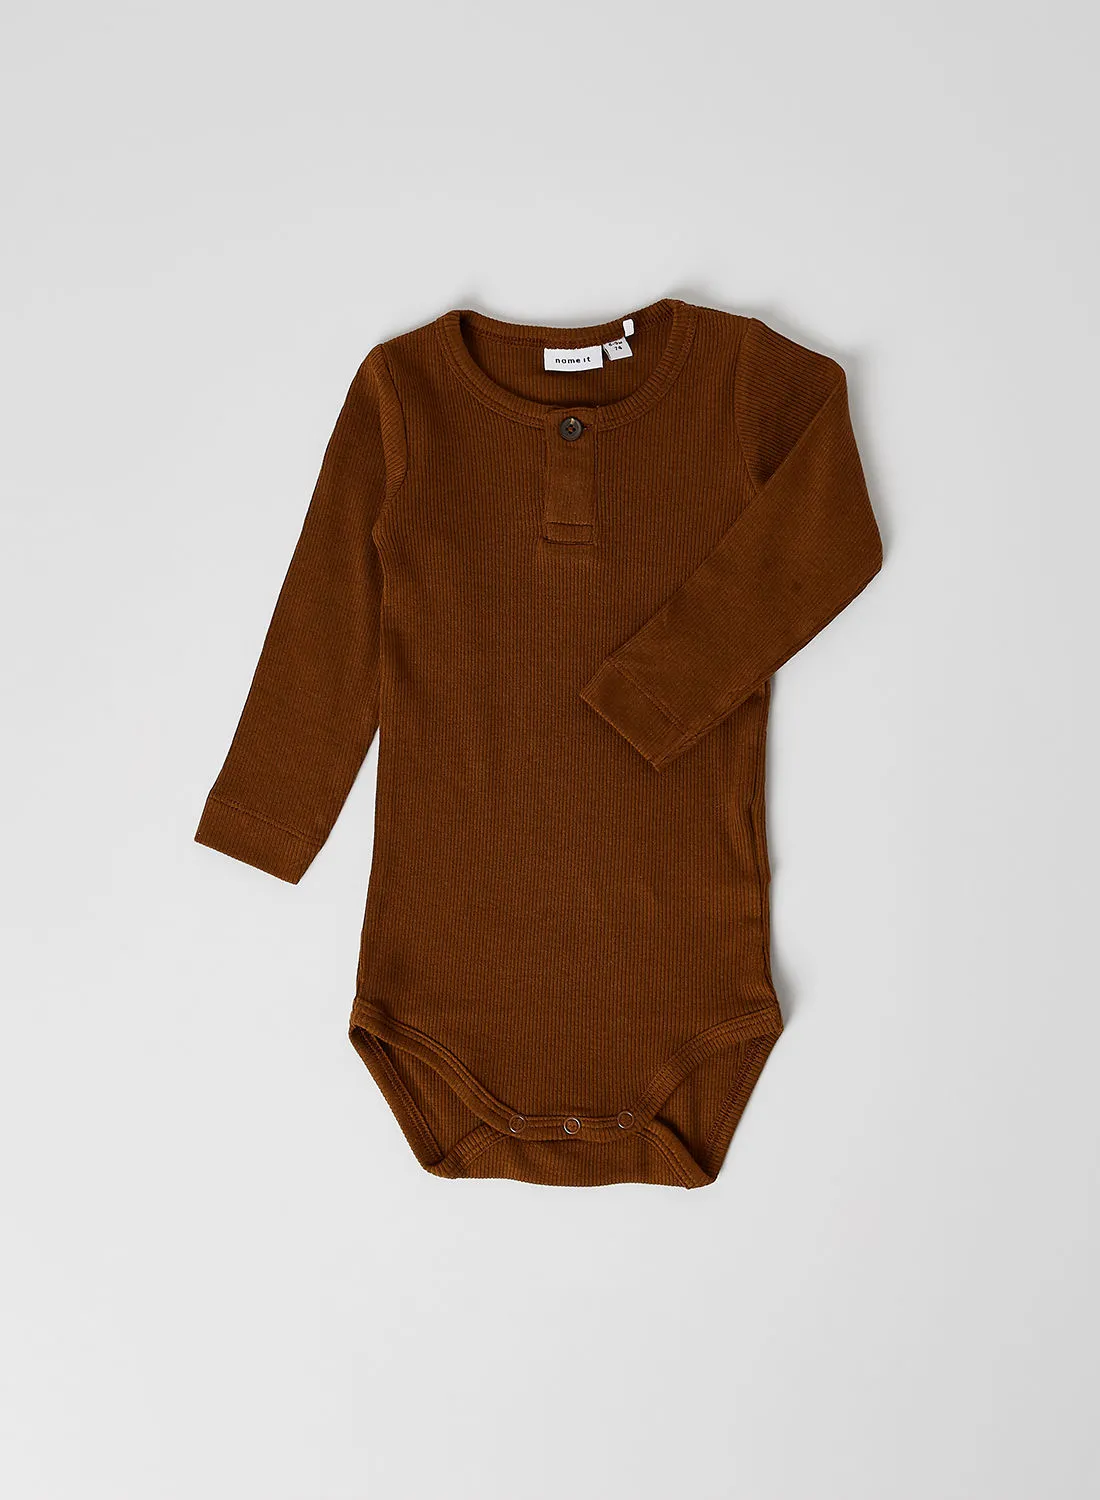 NAME IT Knitted Pattern Henley Neck Onesies Monks Robe